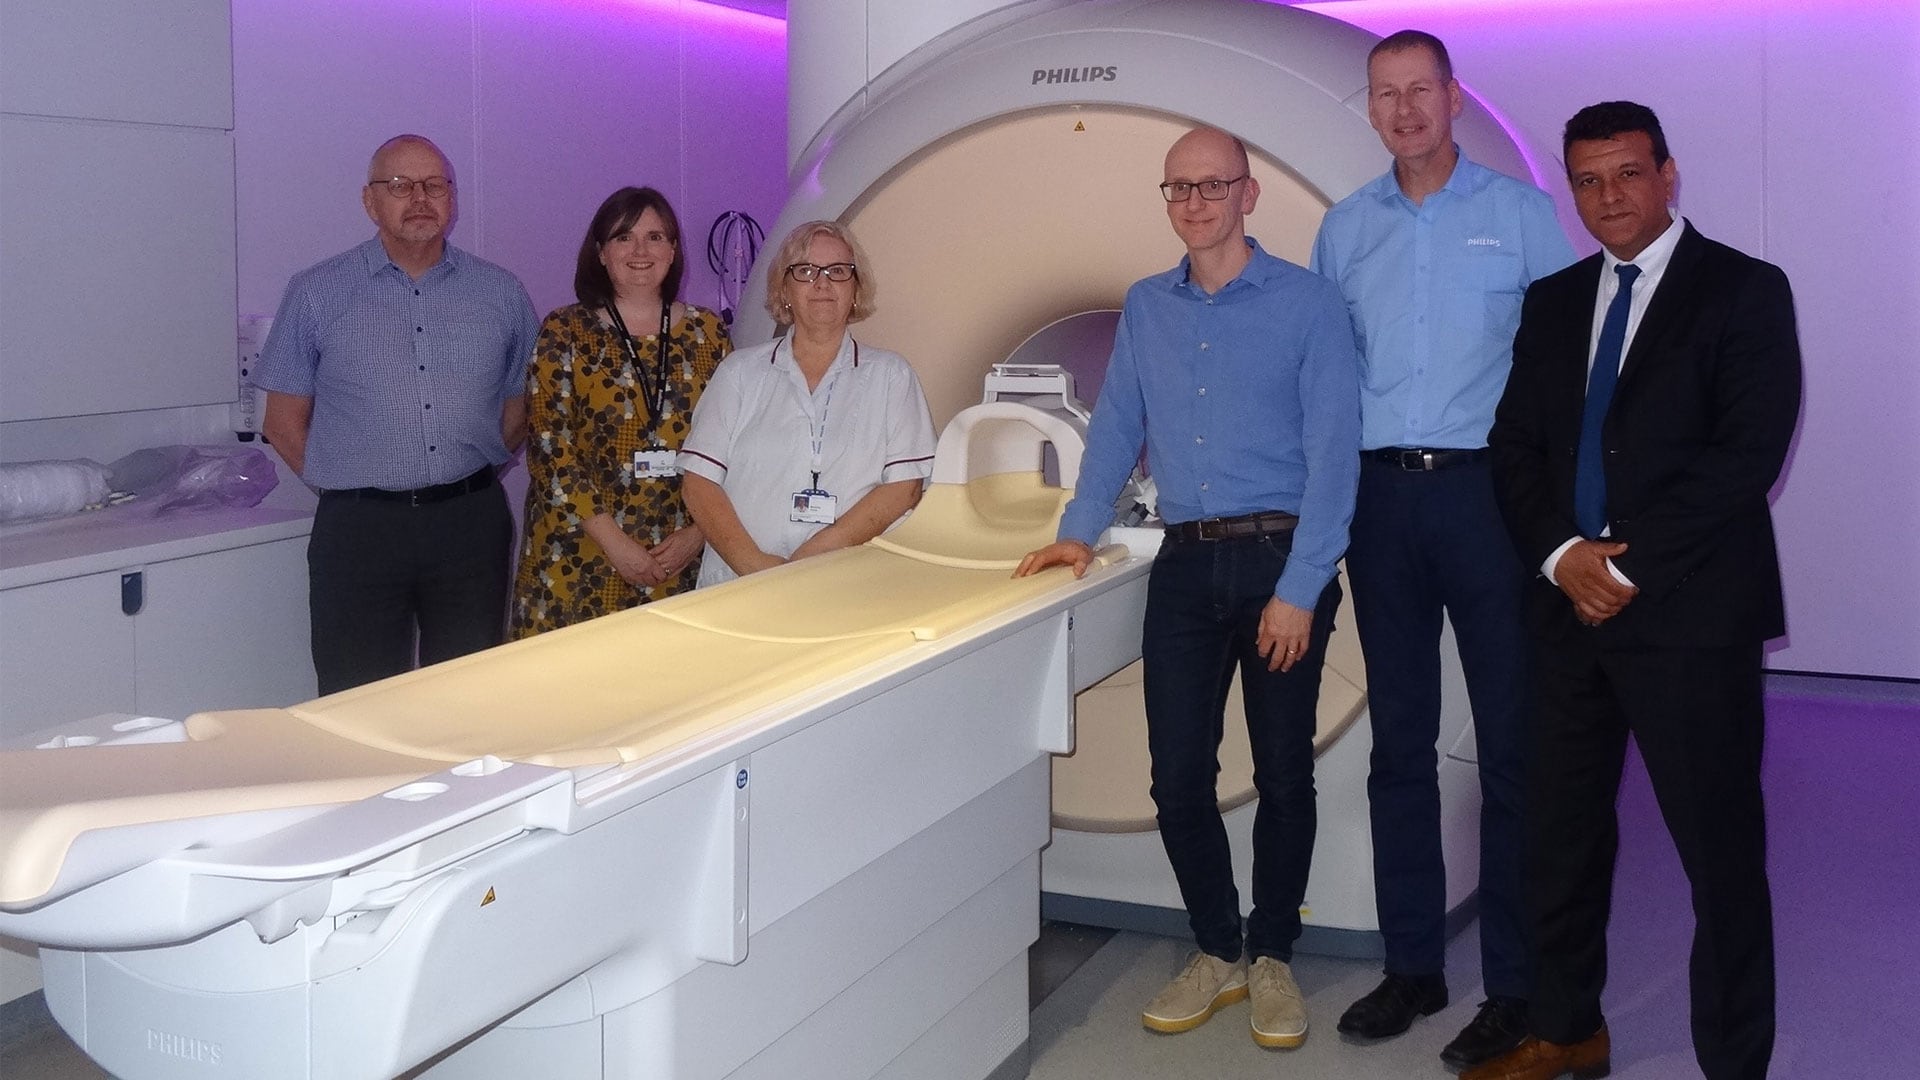 Download image (.jpg) Shown here, left to right, Gwyn Bethell, Radiology Project Manager; Jo Day, MRI Modality Manager; Beverley Jones, Senior Radiographer; Dr. Rob Dineen, Consultant Radiologist; Phil Worville, Technical Modality Lead FSE, Philips UKI and Pete Bains Imaging Account Manager, Philips UKI (opens in a new window)